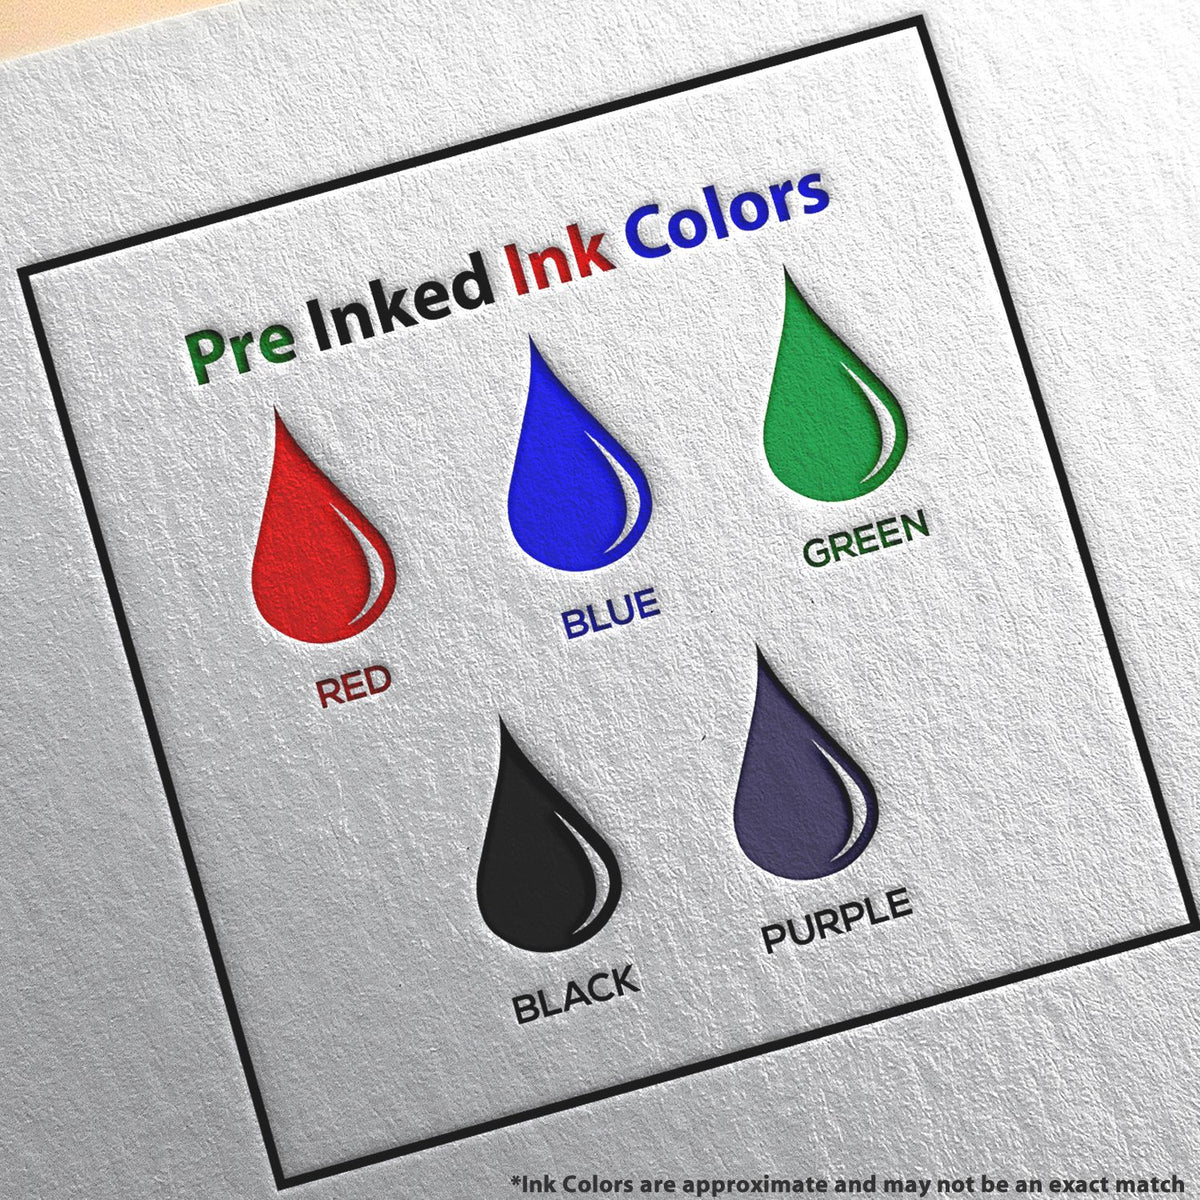 A picture showing the different ink colors or hues available for the Slim Pre-Inked Connecticut Architect Seal Stamp product.